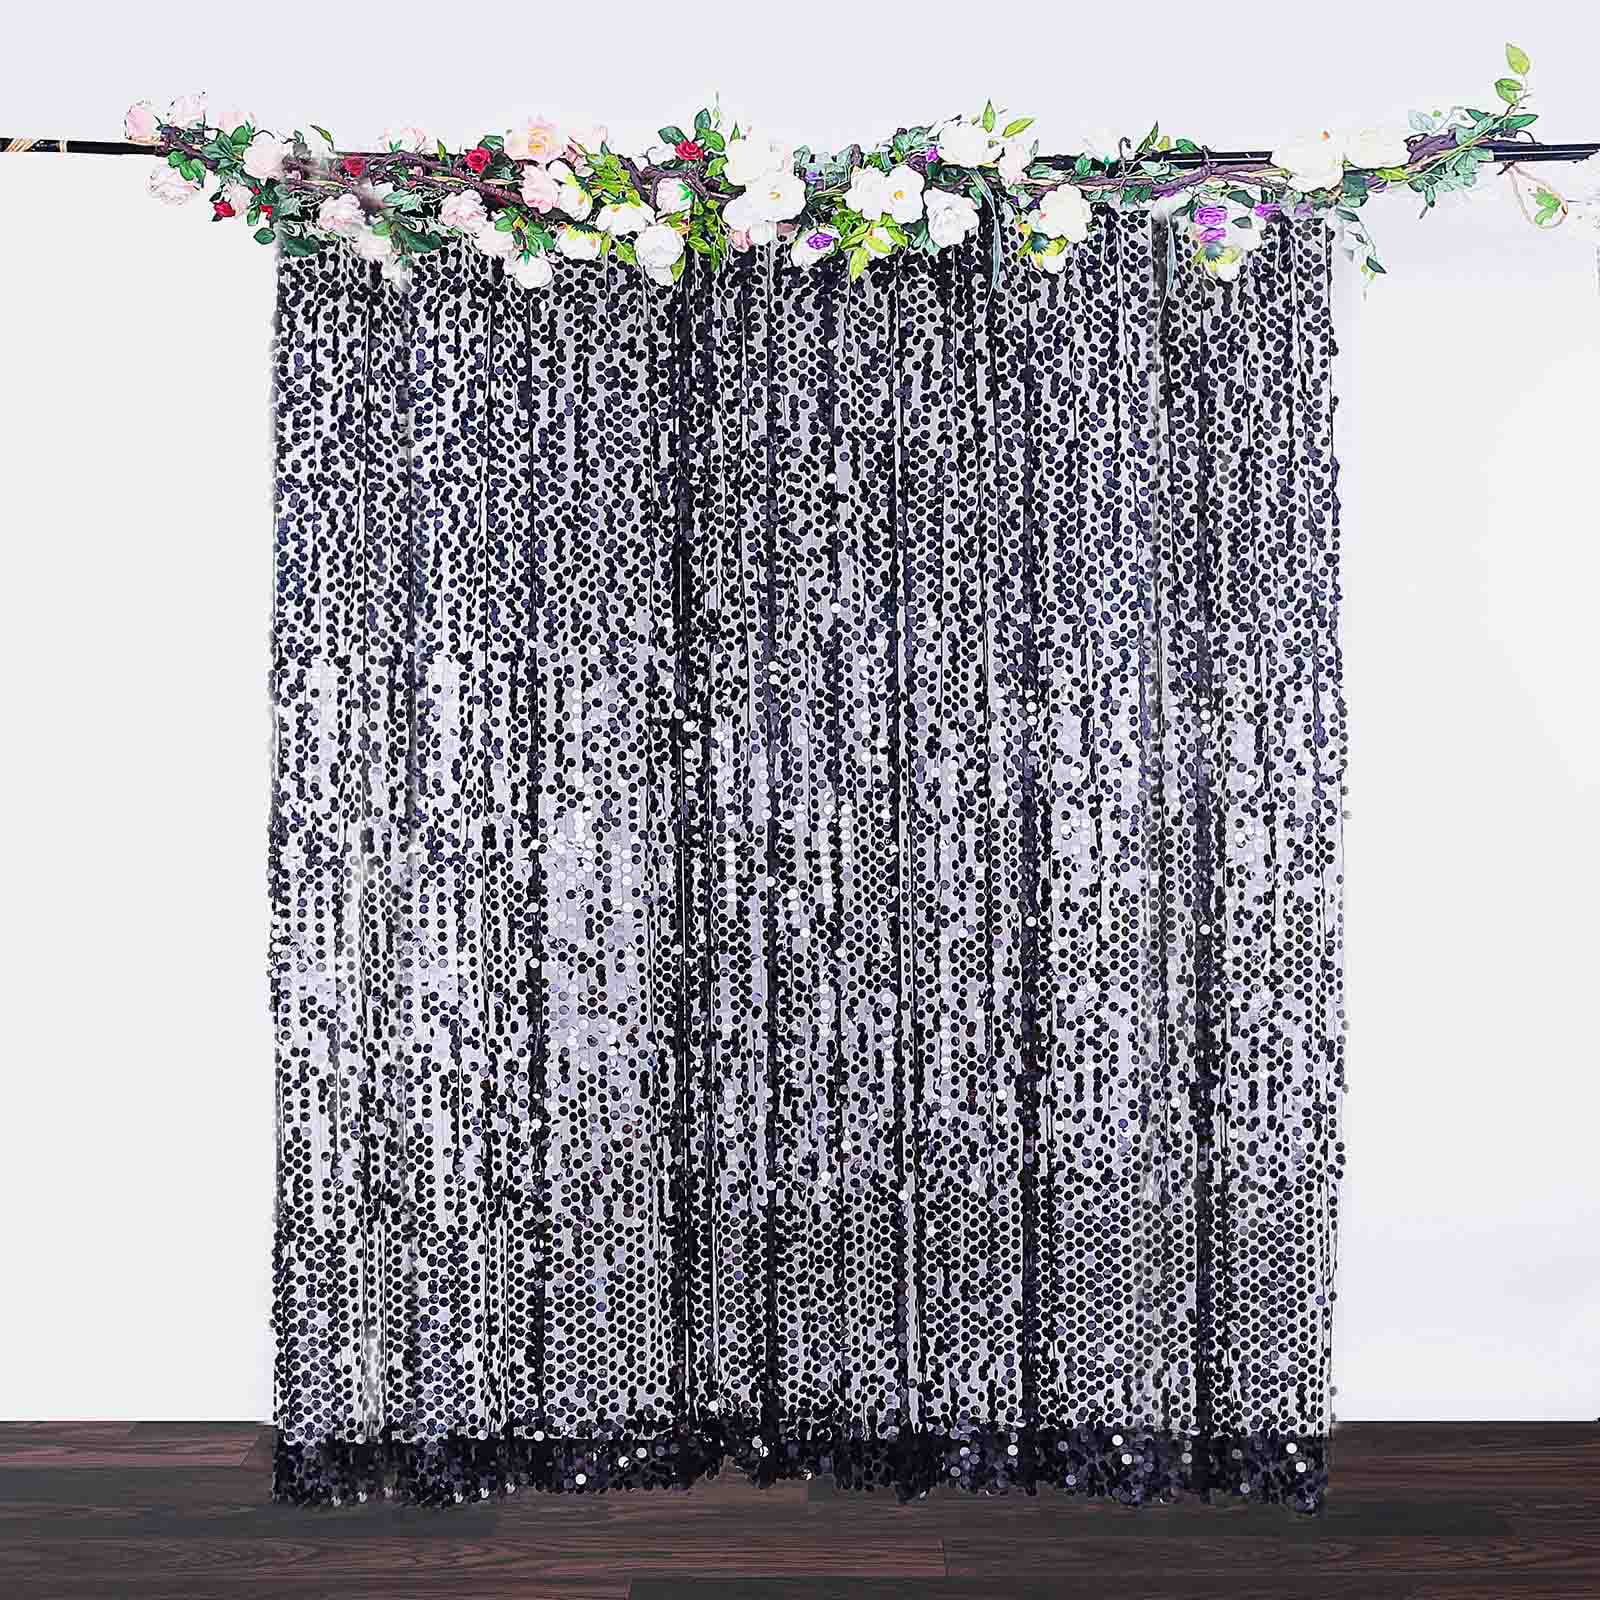 20ft x 10ft Big Payette Sequined BACKDROP Curtain Photobooth Wedding Party SALE 